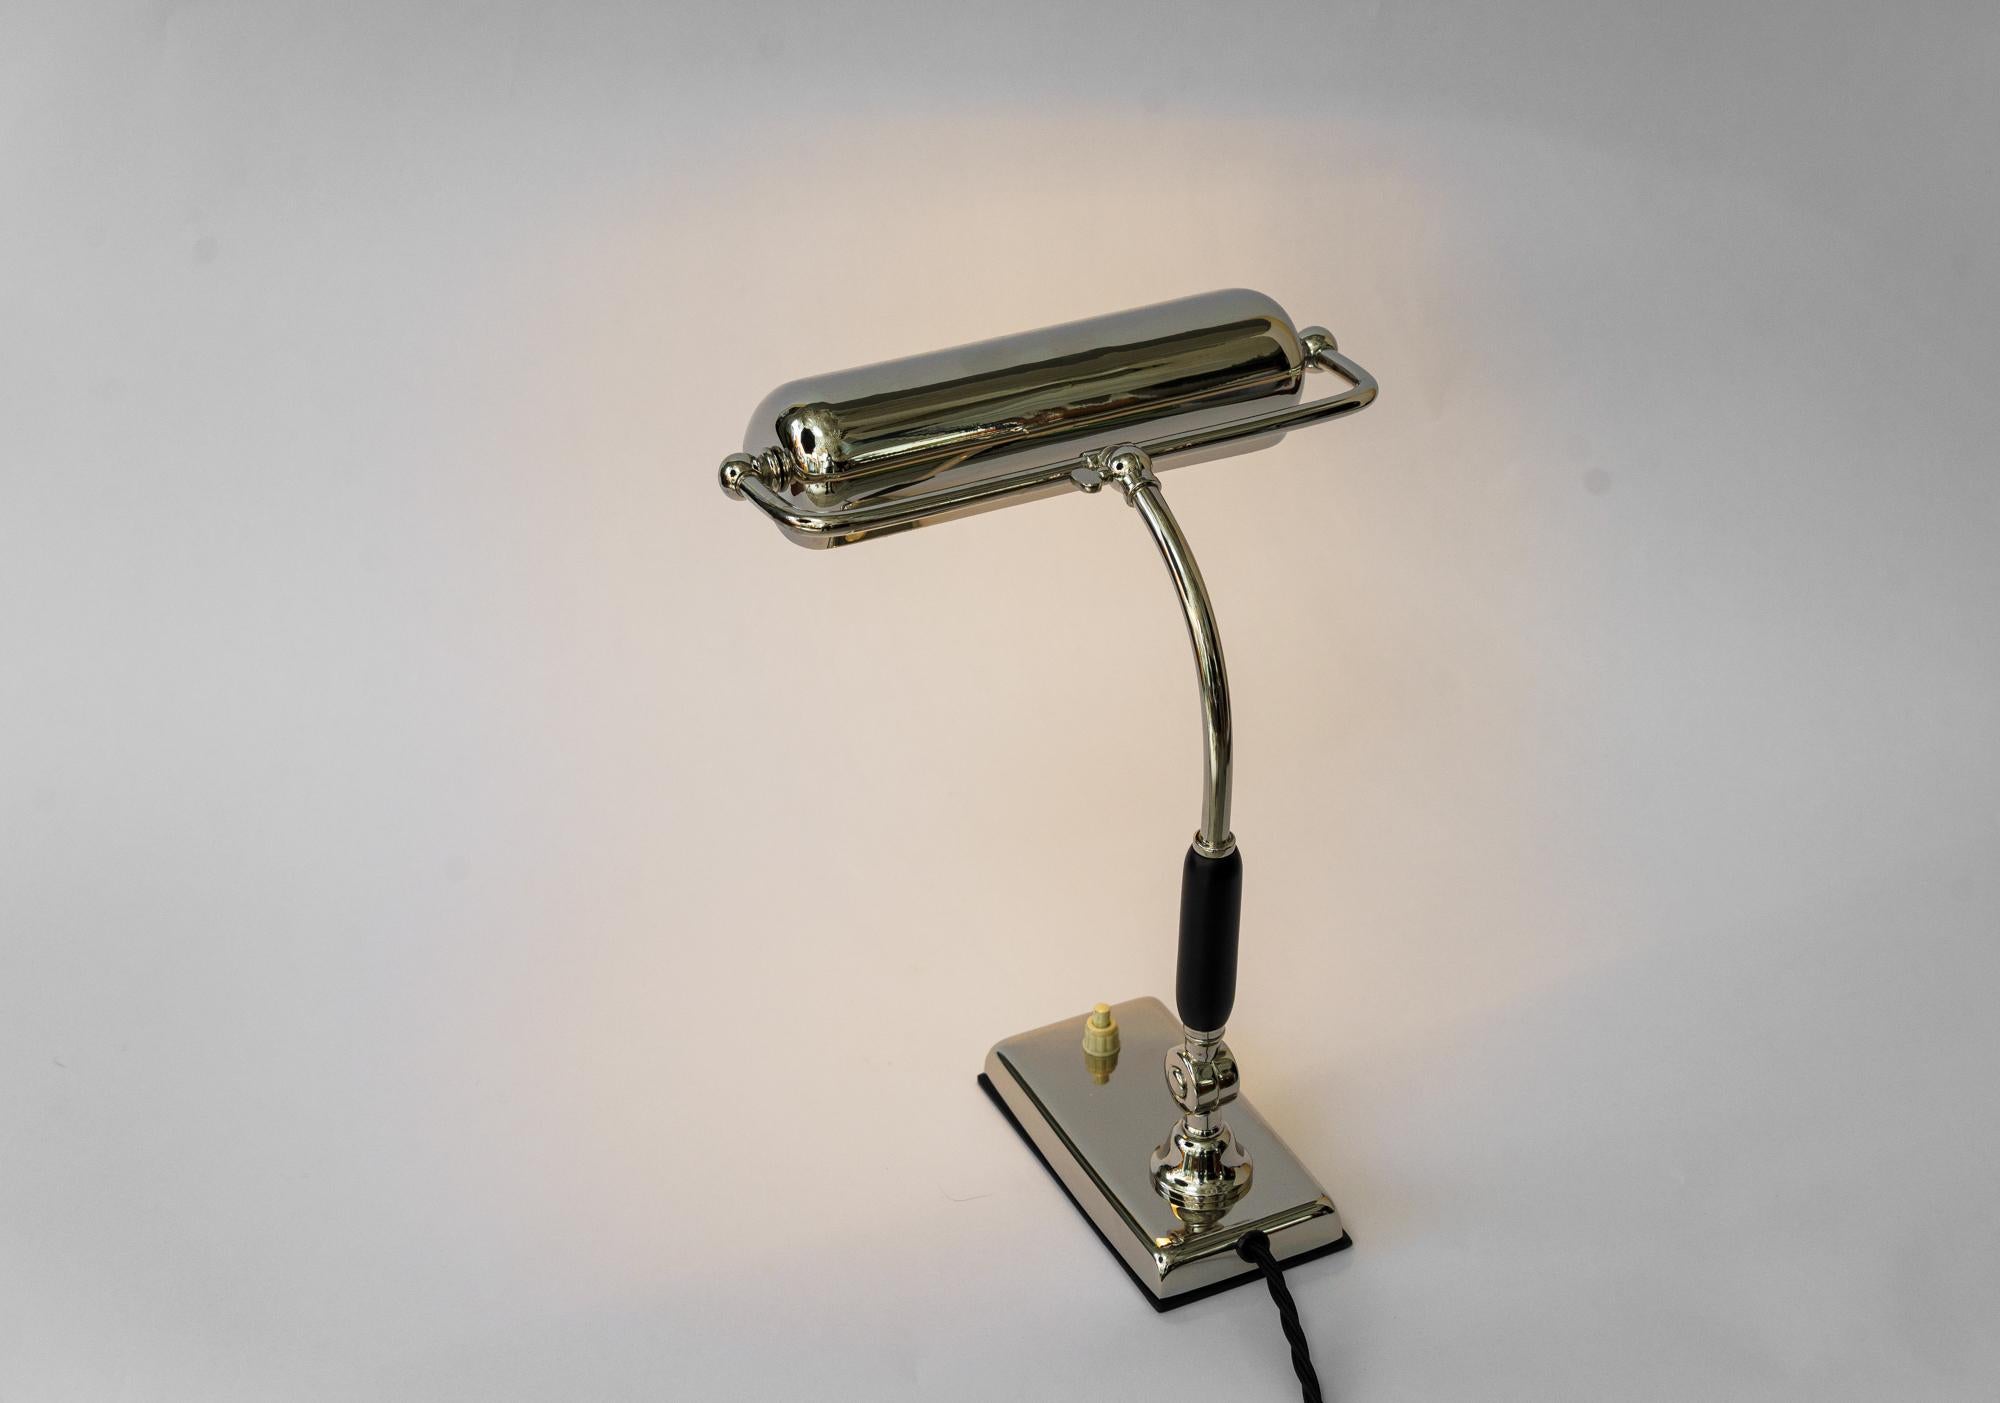 Small Swiveling Art Deco Table Lamp 'Nickel - Plated' Vienna Around 1920s For Sale 11